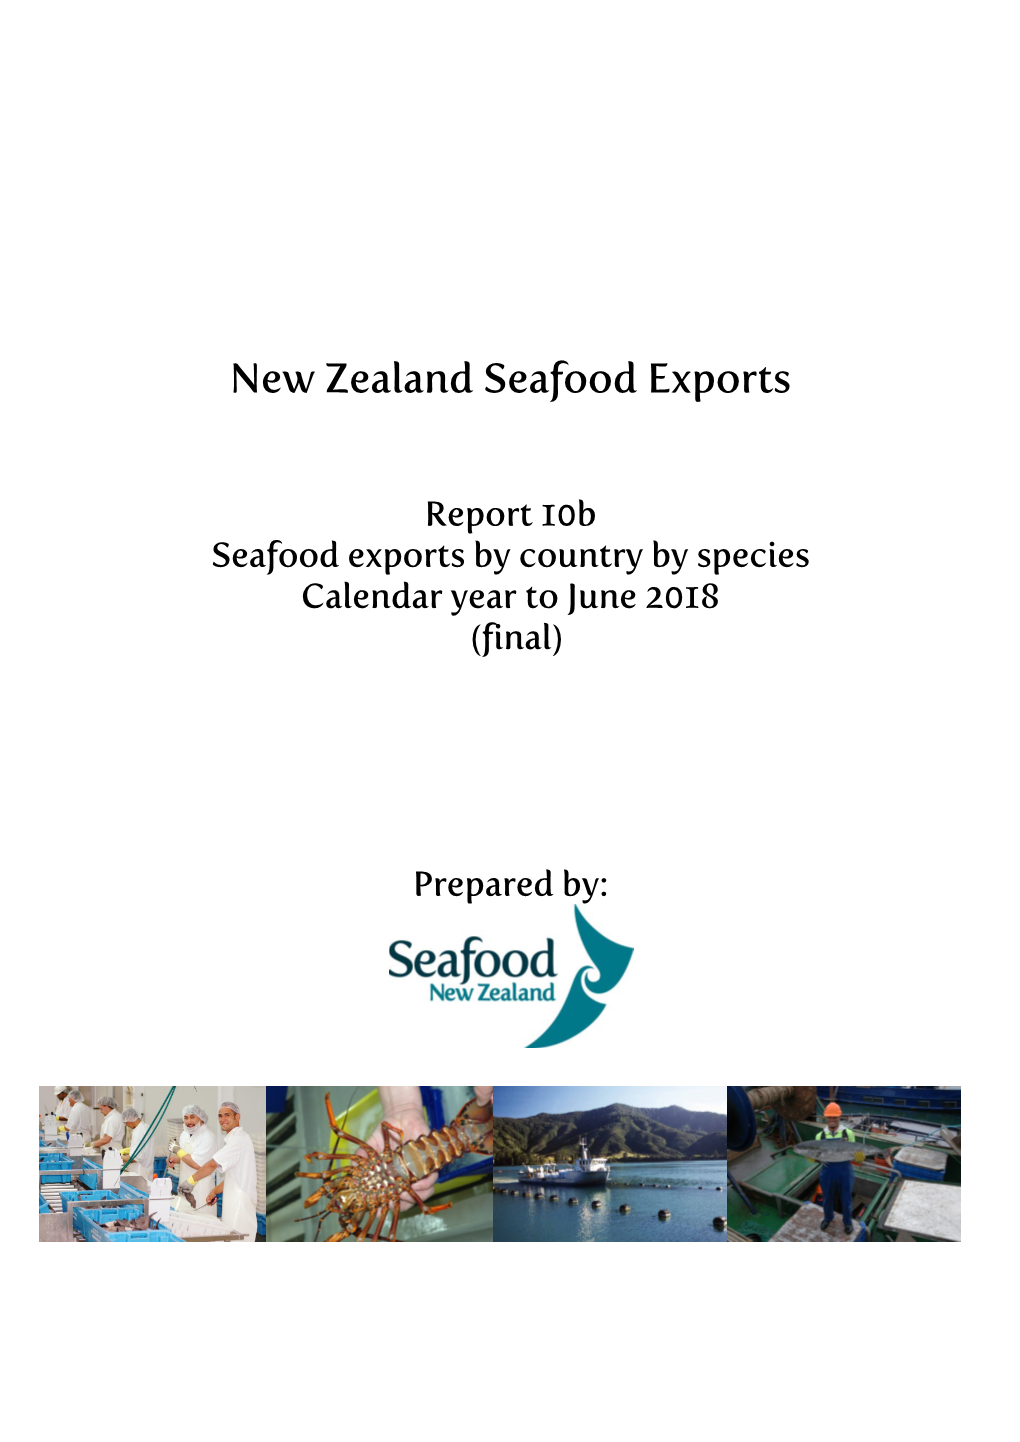 New Zealand Seafood Exports